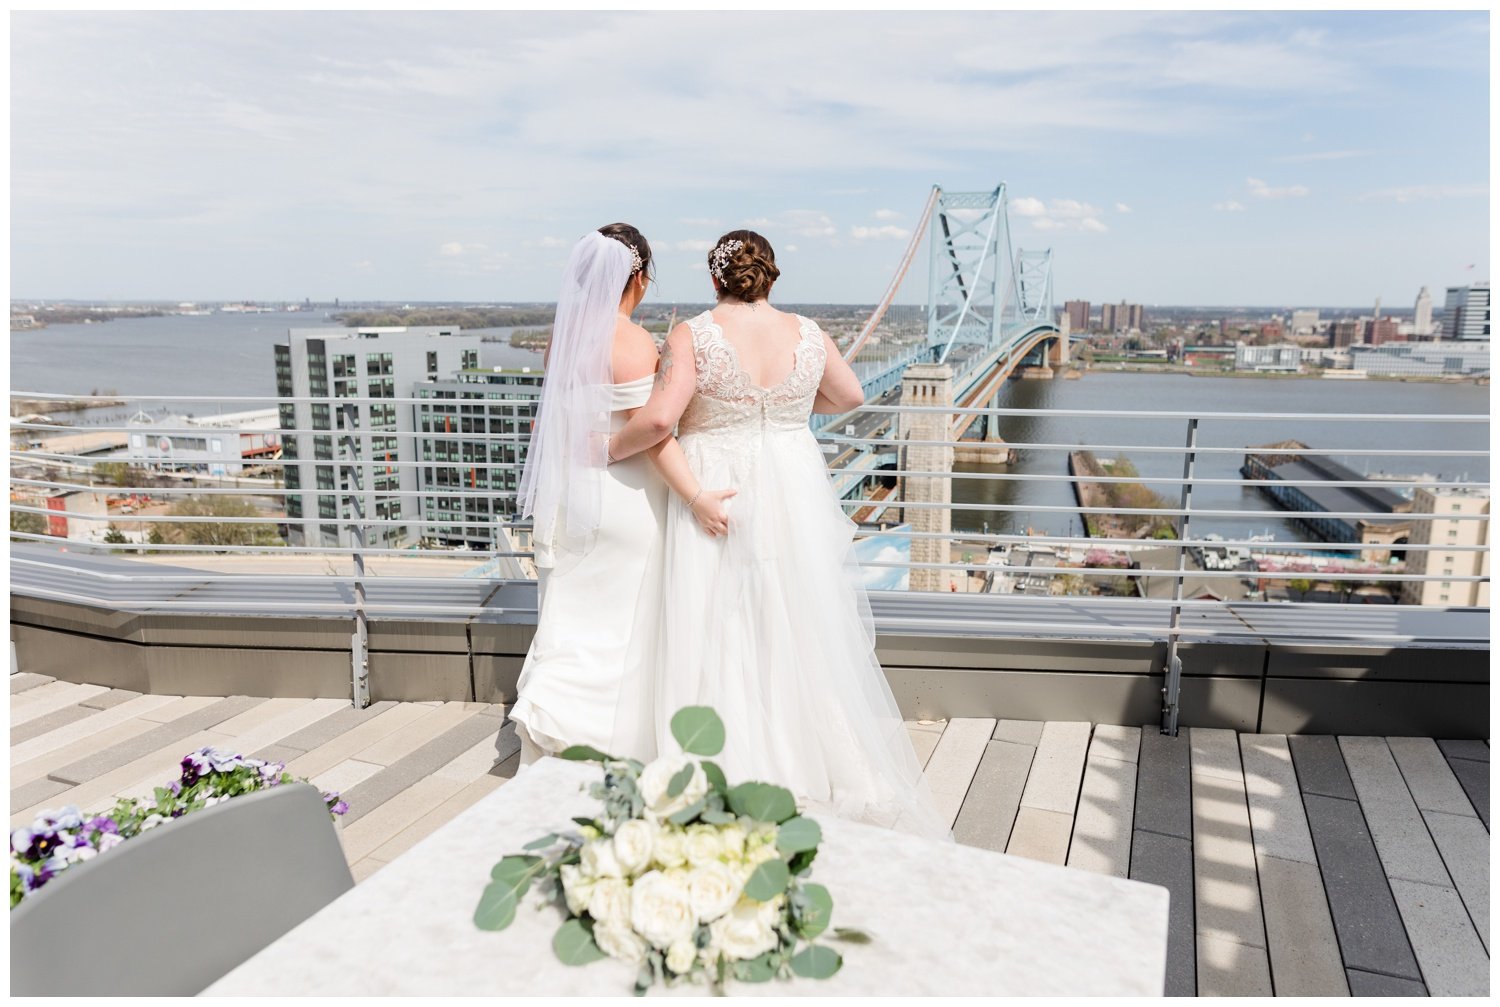 Race-Street-Pier-and-Yards-Brewing-Compnay-Philly-LGBT-Wedding-14.jpg